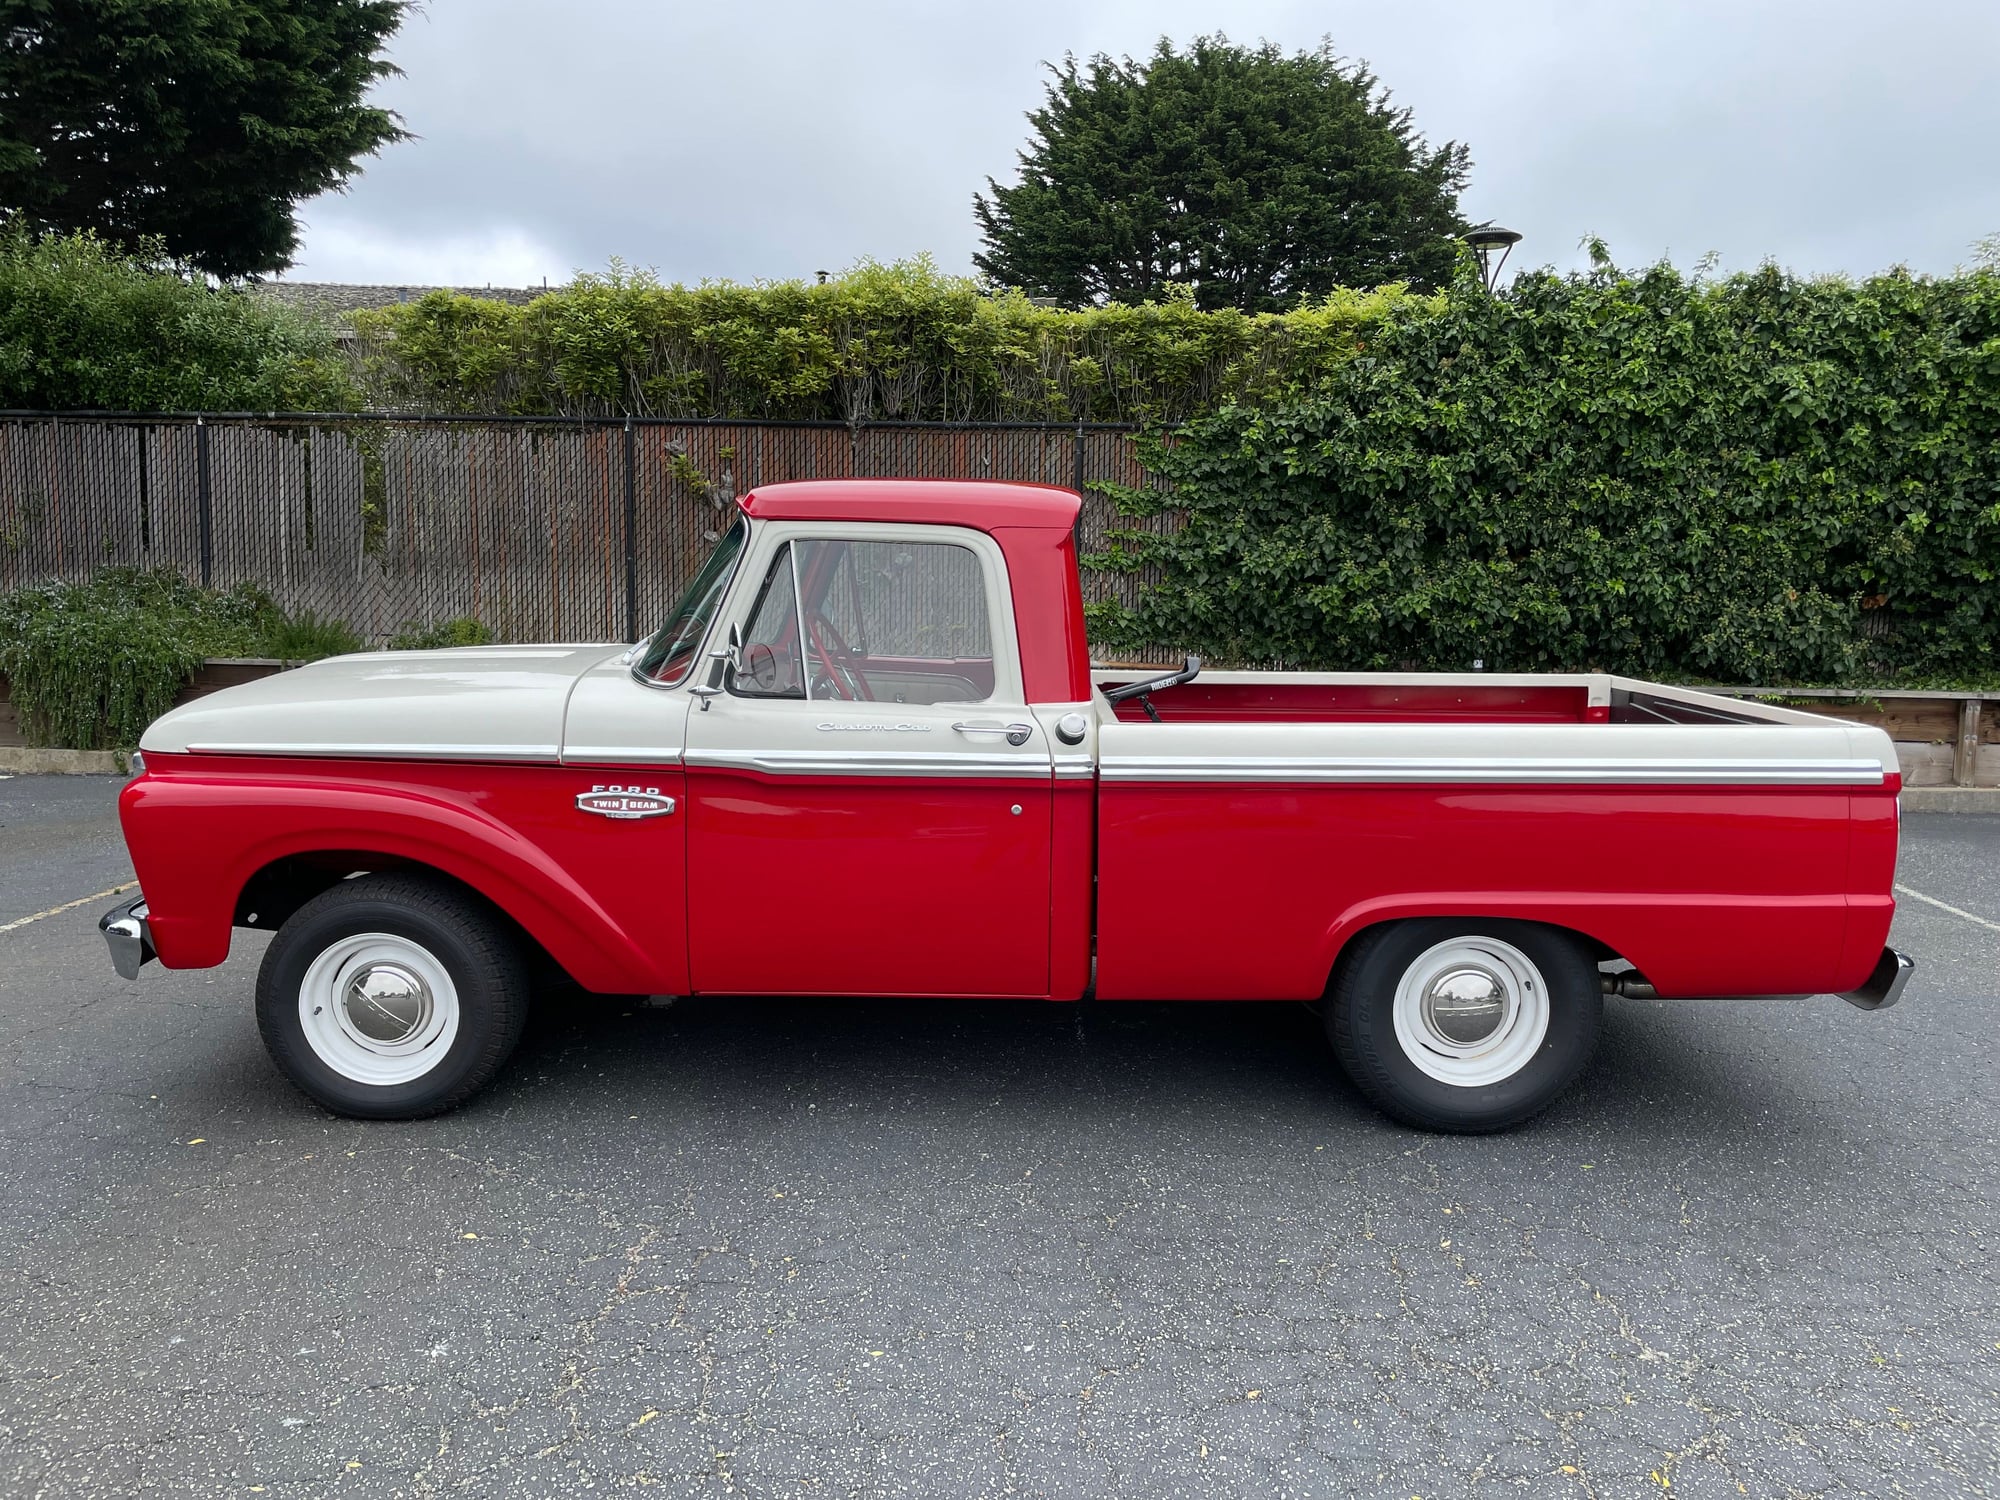 1966 Ford F-100 - 1966 Ford F-100 Custom Cab for sale - Used - VIN F1OAL792130 - 35,475 Miles - 8 cyl - 2WD - Automatic - Truck - Other - Carmel, CA 93921, United States